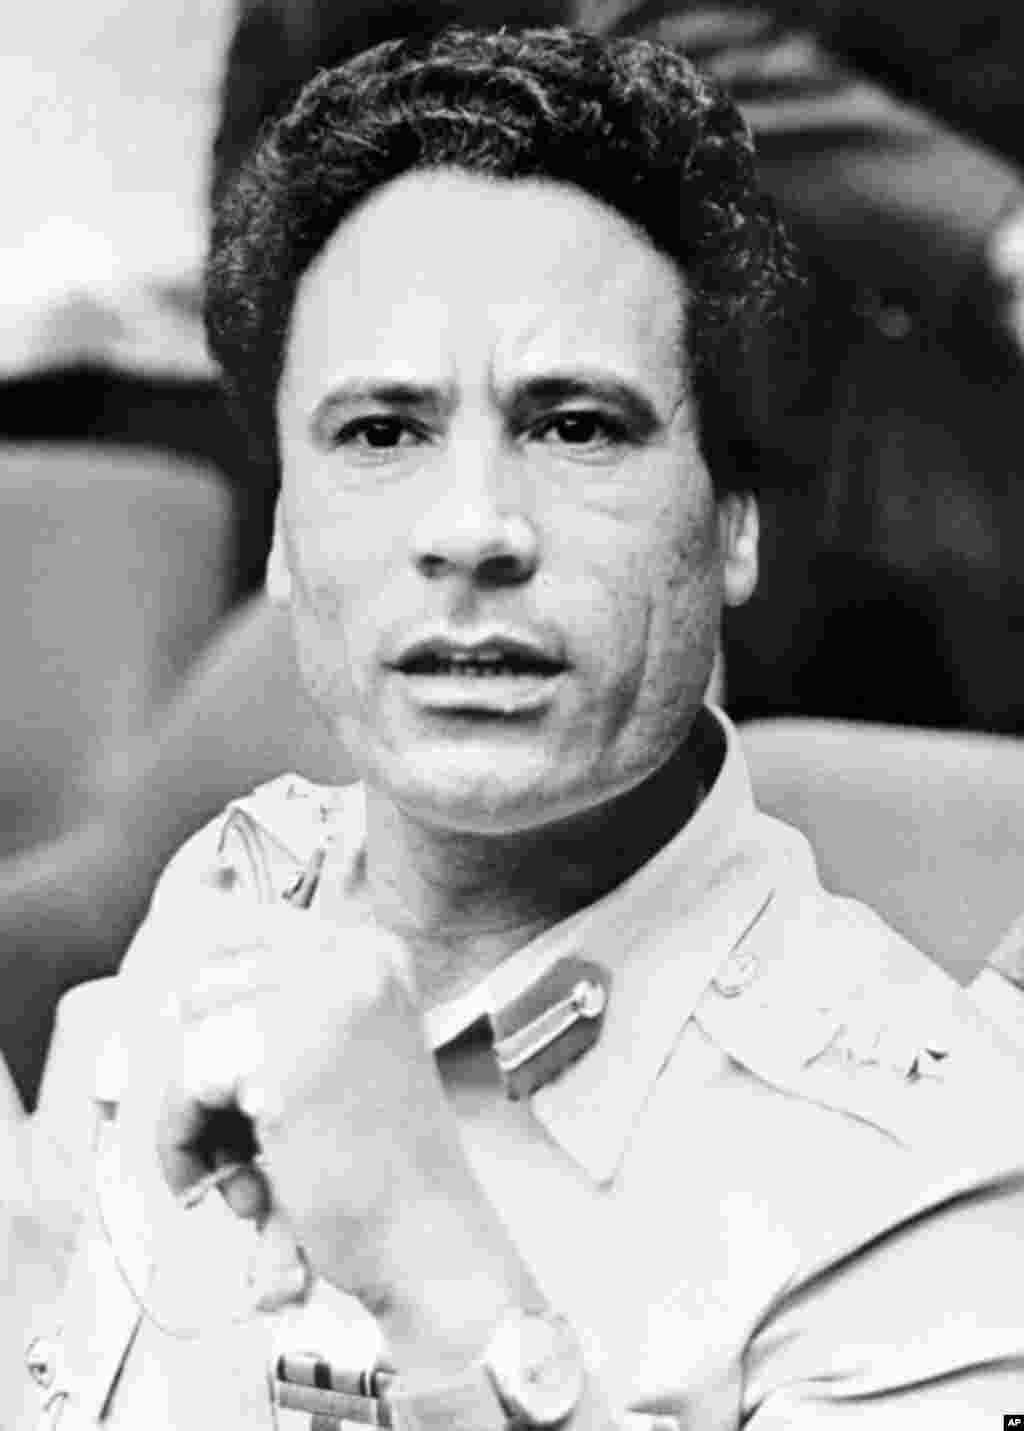 Picture taken 04 August 1975 in Kampala of Libyan Head of State Colonel Moammar Gadhafi during the summit of the Organization of African Unity (OAU), (AFP).